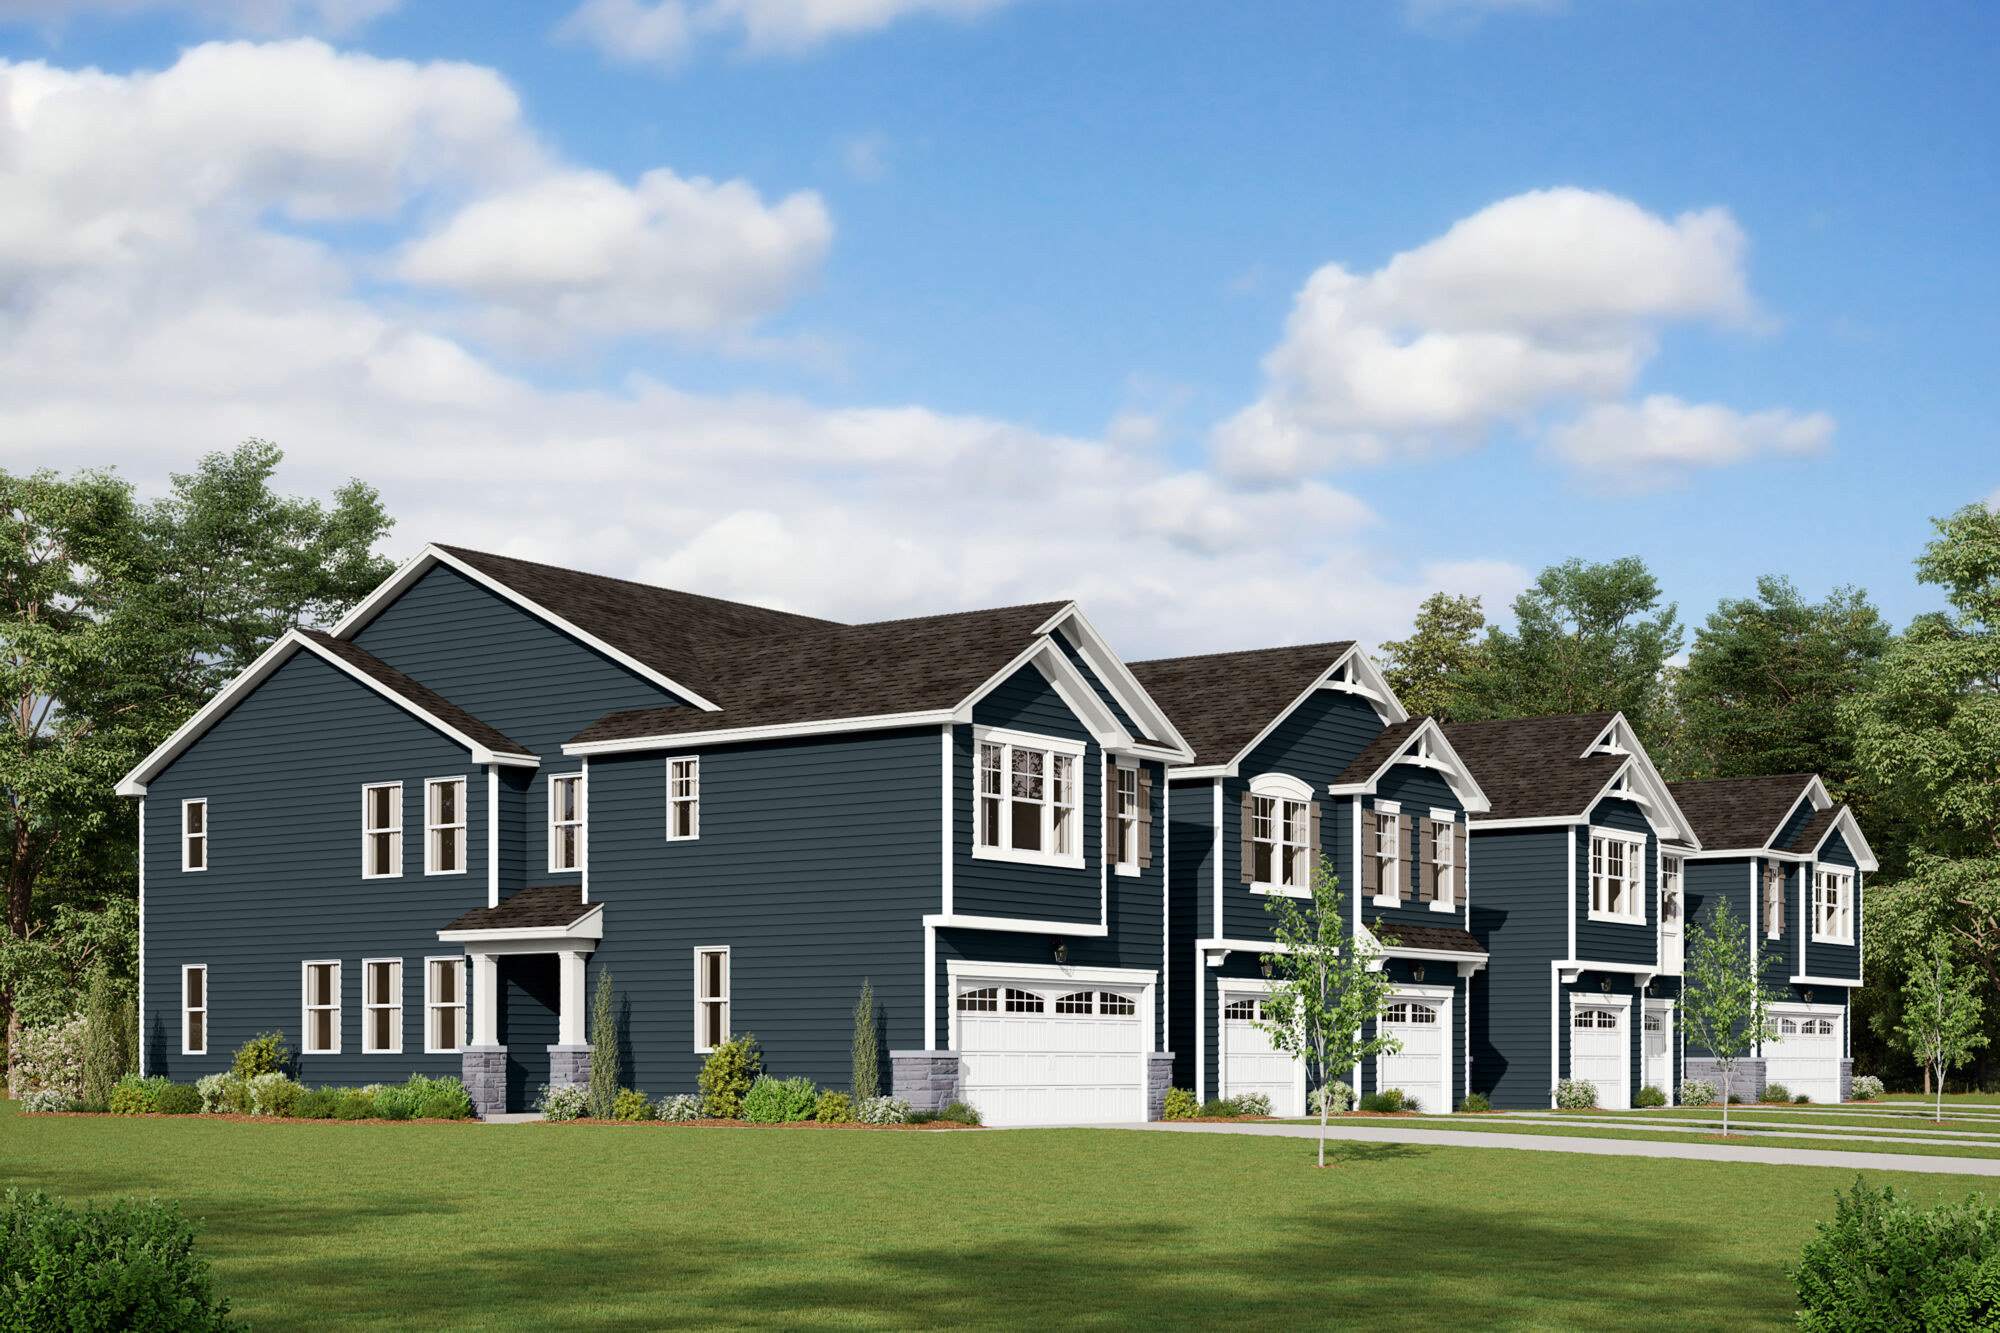  Town Homes with garage, window and exterior clapboard